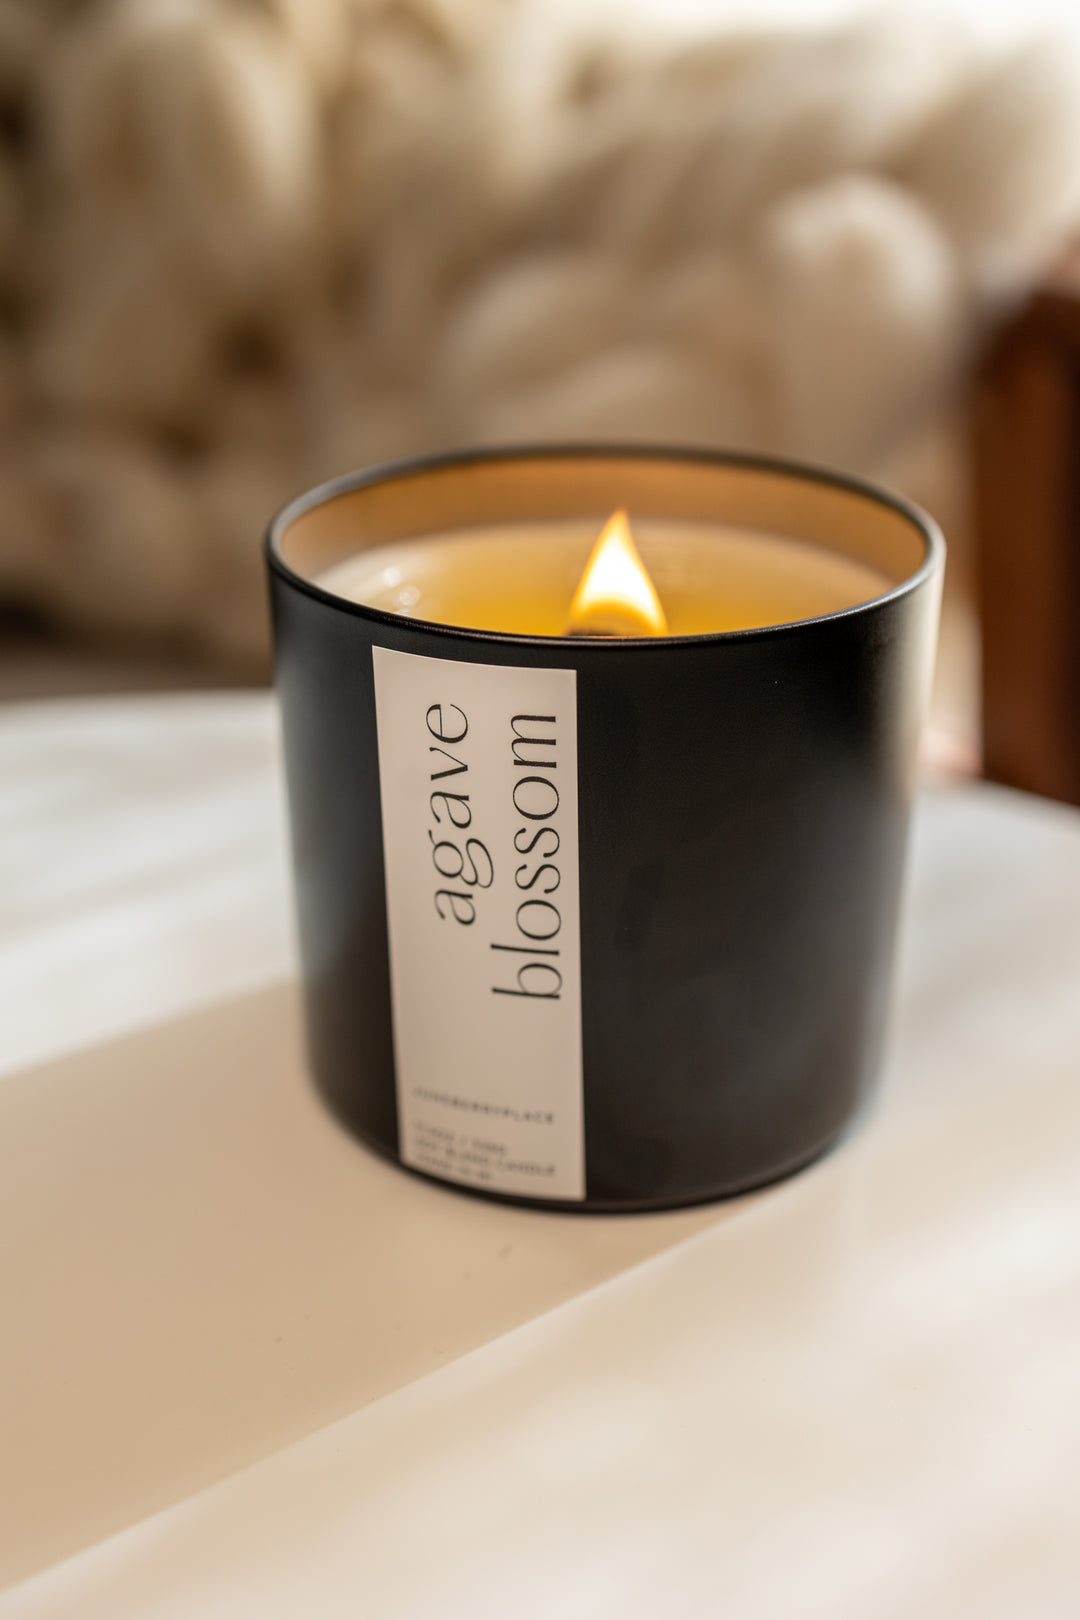 Agave Blossom Soy Candle in matte black vessel by juneberryplace home fragrances